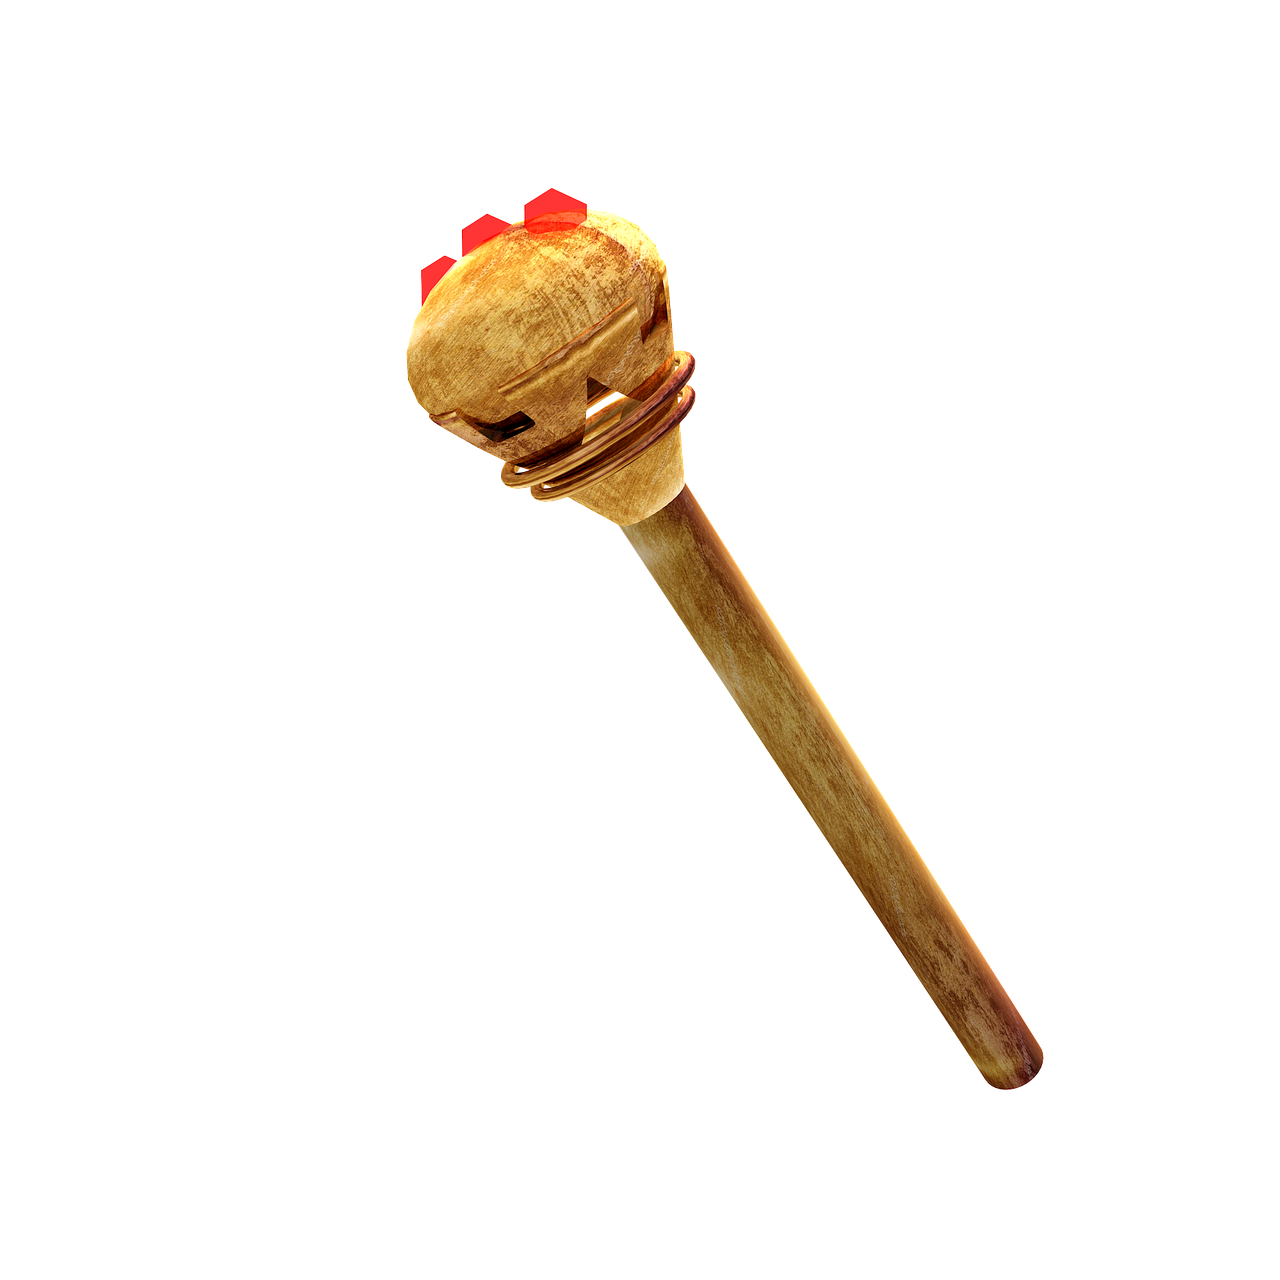 scepter staff gold free photo